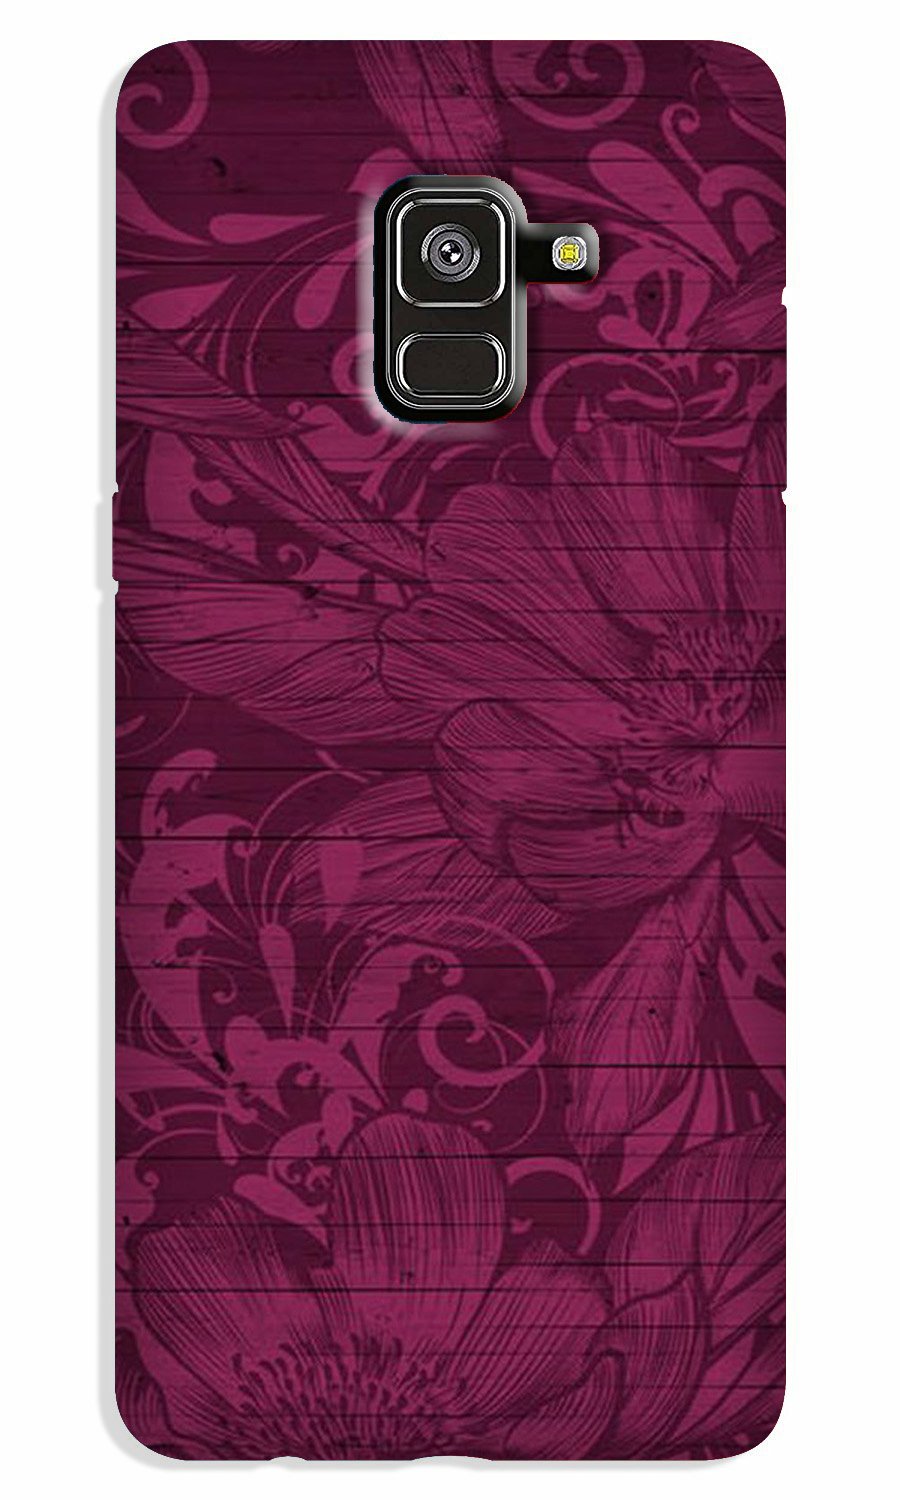 Purple Backround Case for Galaxy A8 Plus